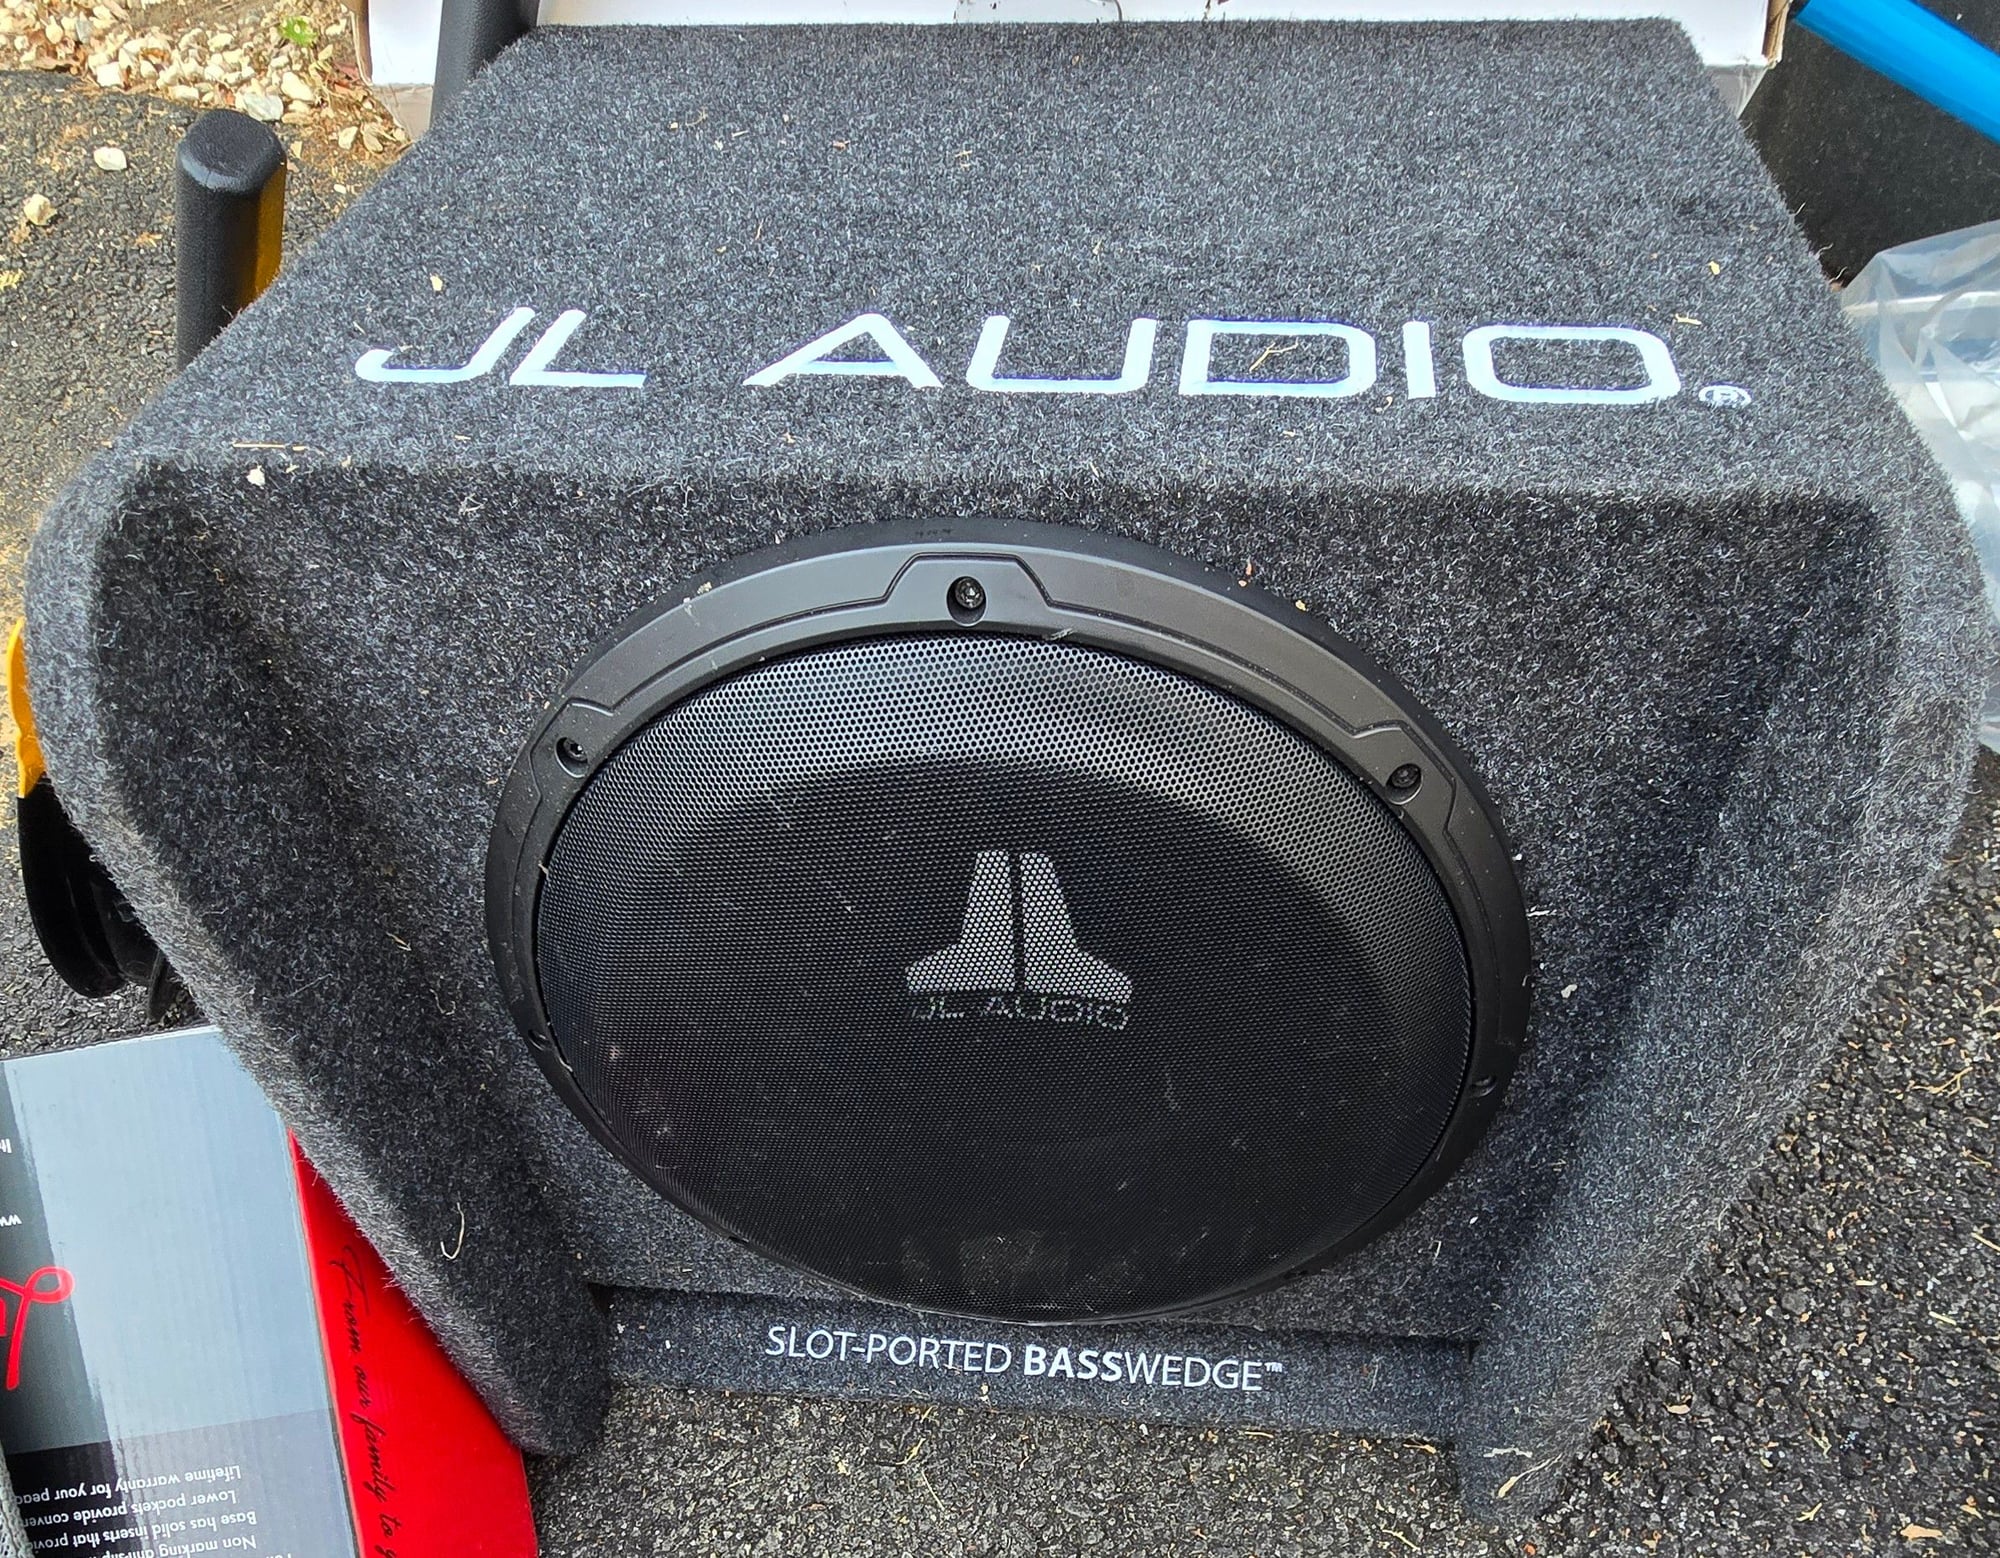 Audio Video/Electronics - JL Audio Slot Ported Enclosed Subwoofer Like New, Compact, and it CRANKS! - Used - All Years Any Make All Models - Laurel, MD 20708, United States